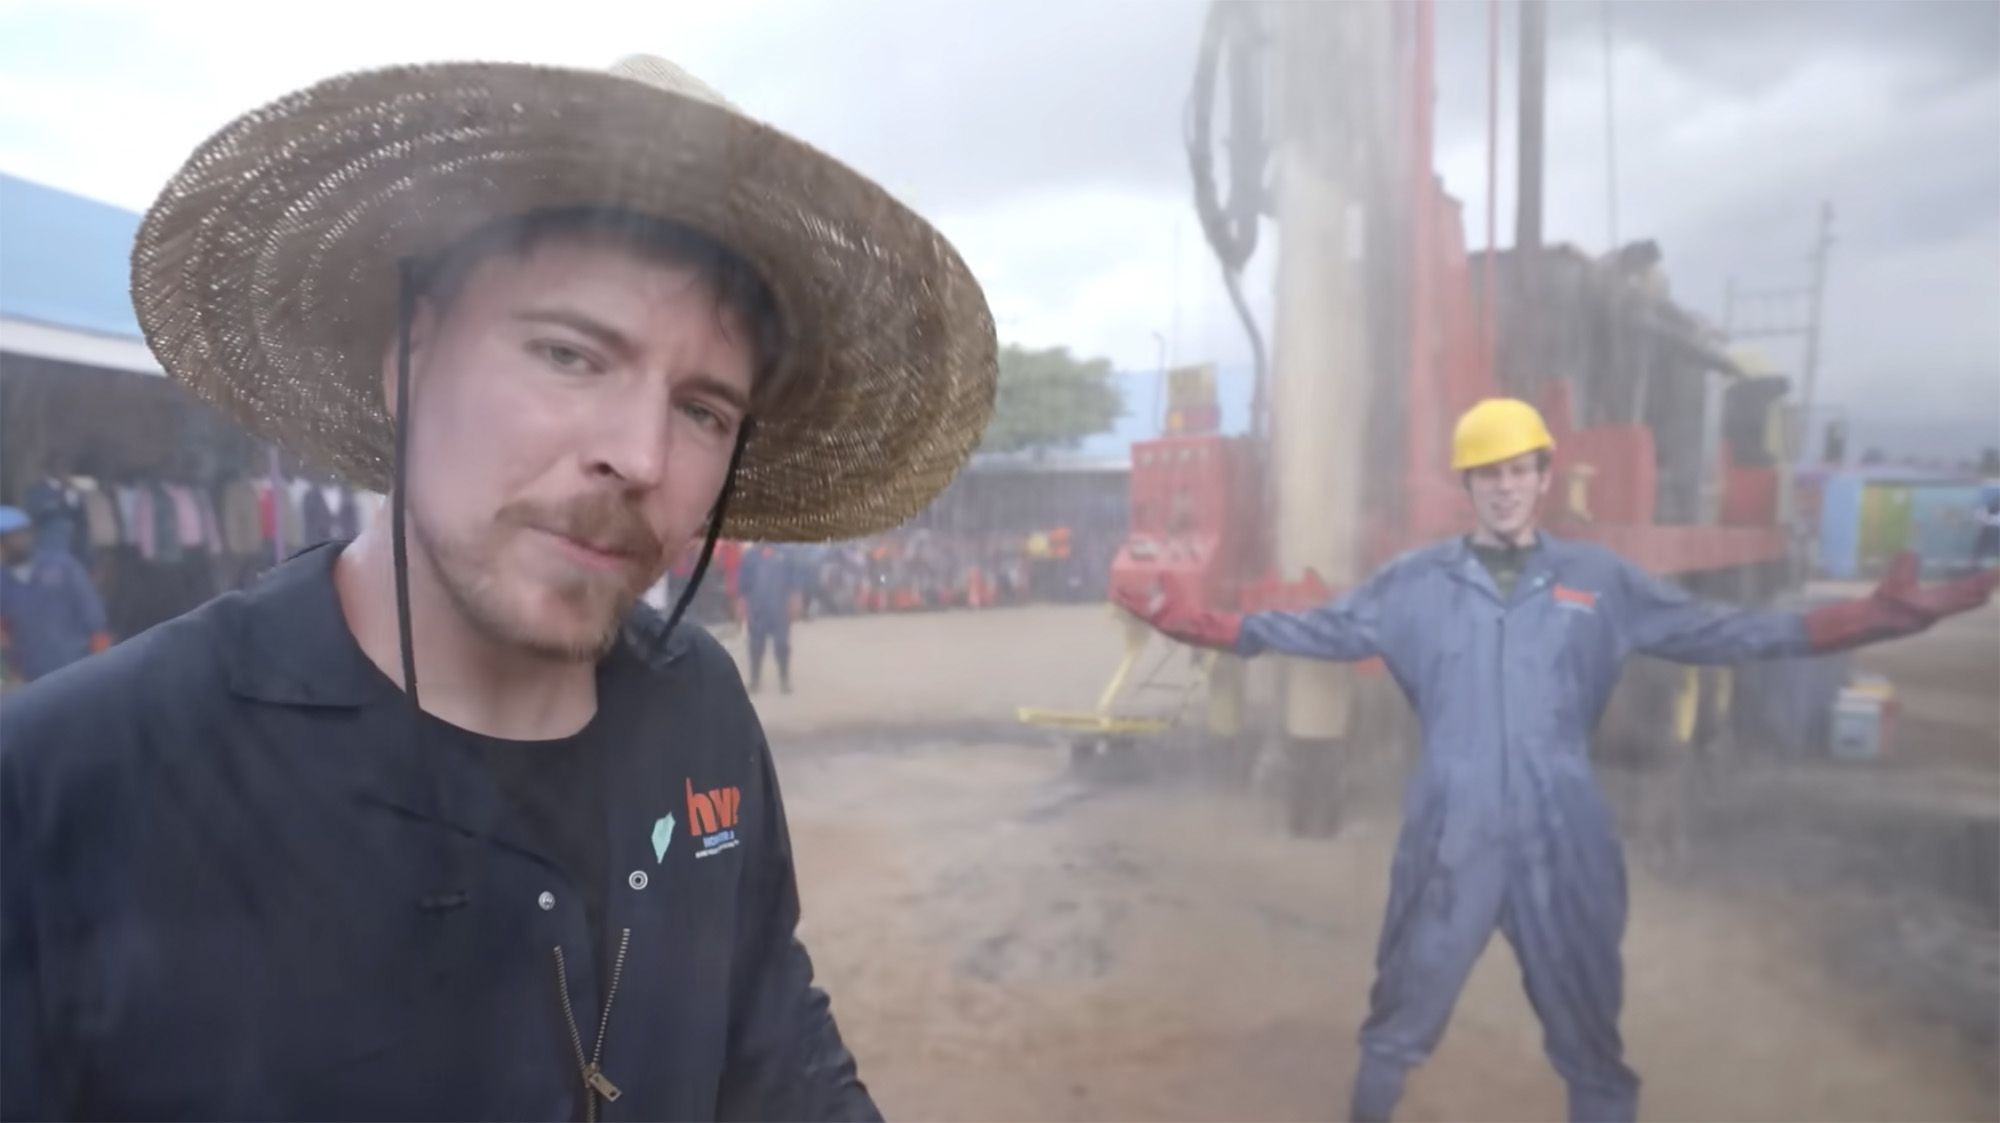 YouTuber Mr Beast Builds 100 Drinking Water Wells in Africa